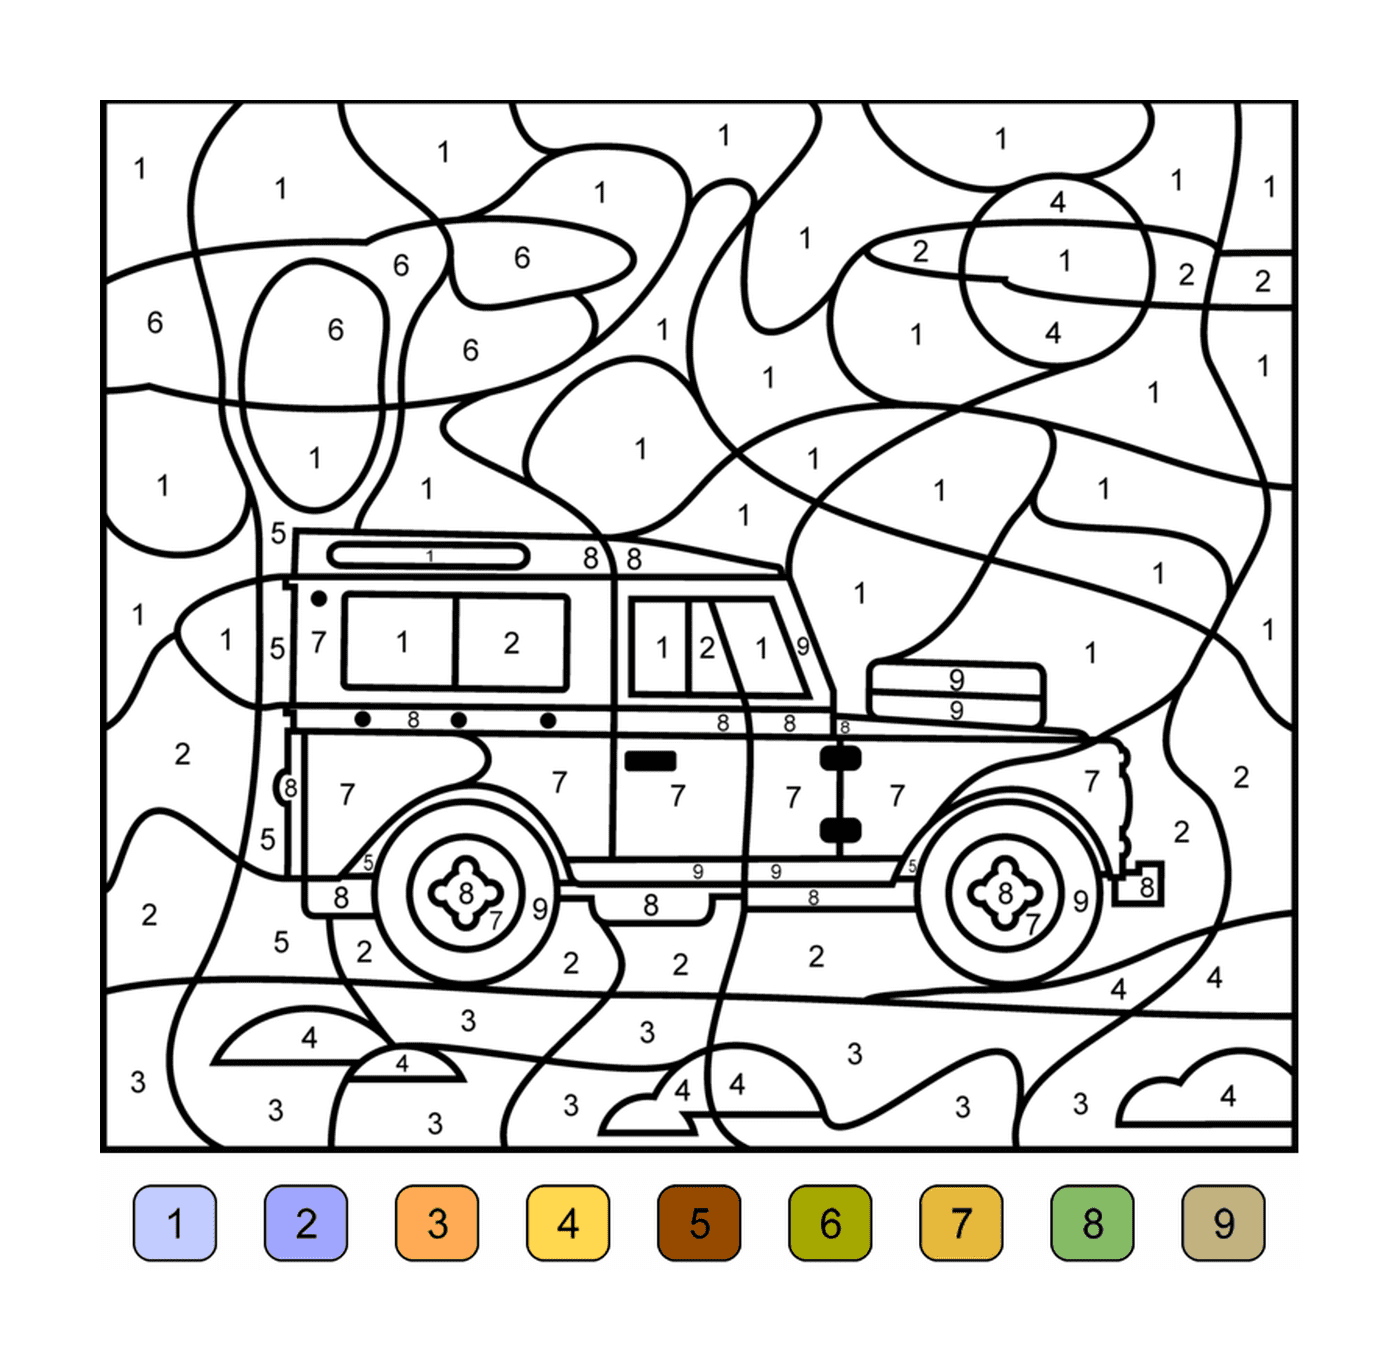  One truck in coloring by number 